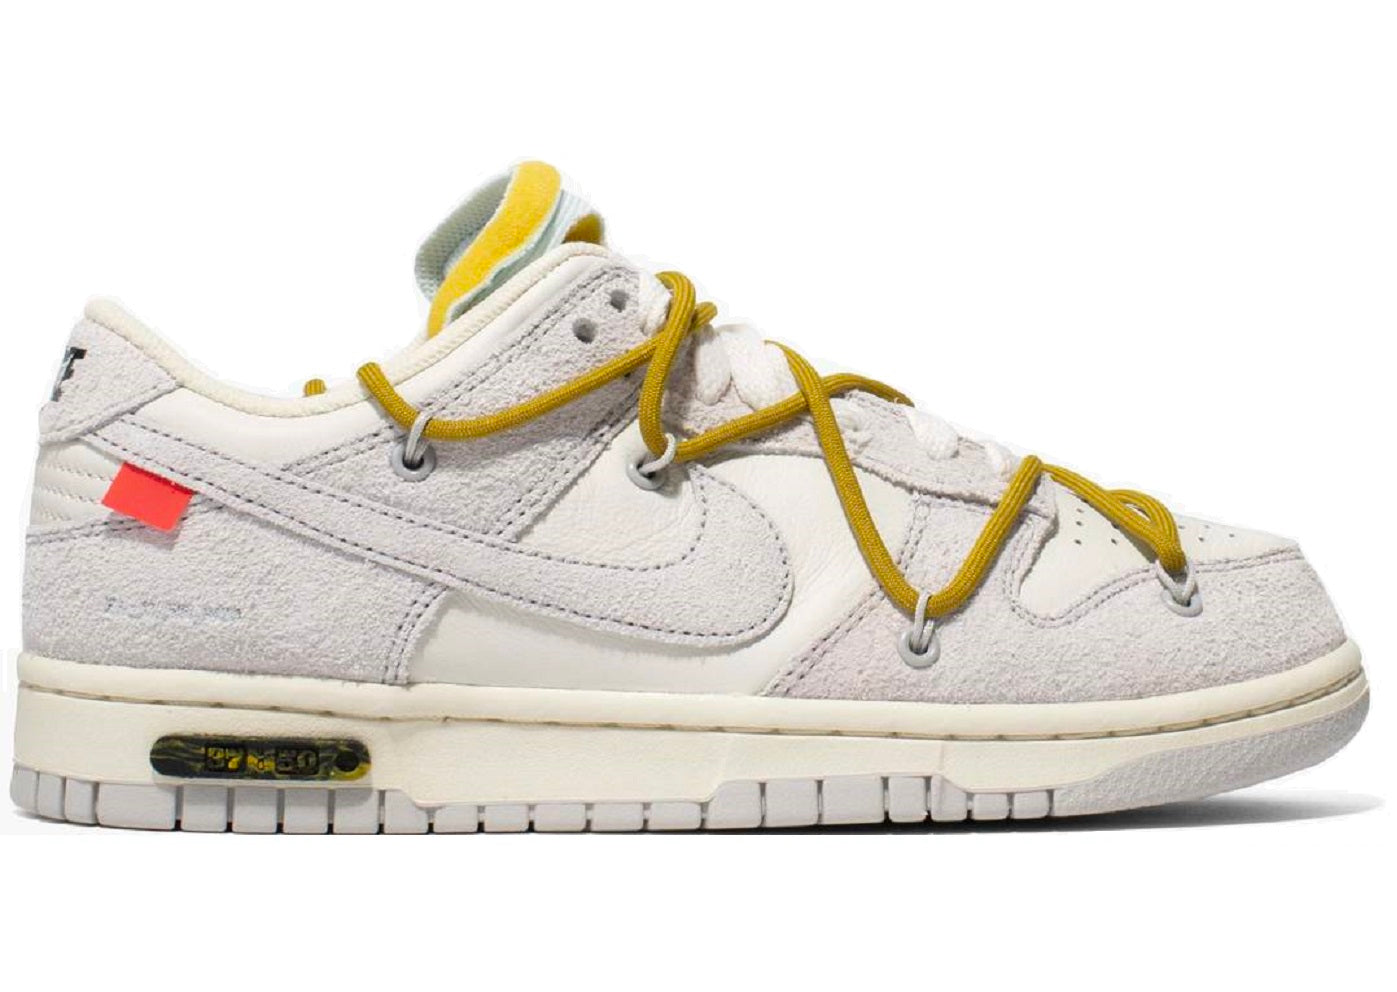 Dunk Low 'Nike x Off-White' Release Date. Nike SNKRS